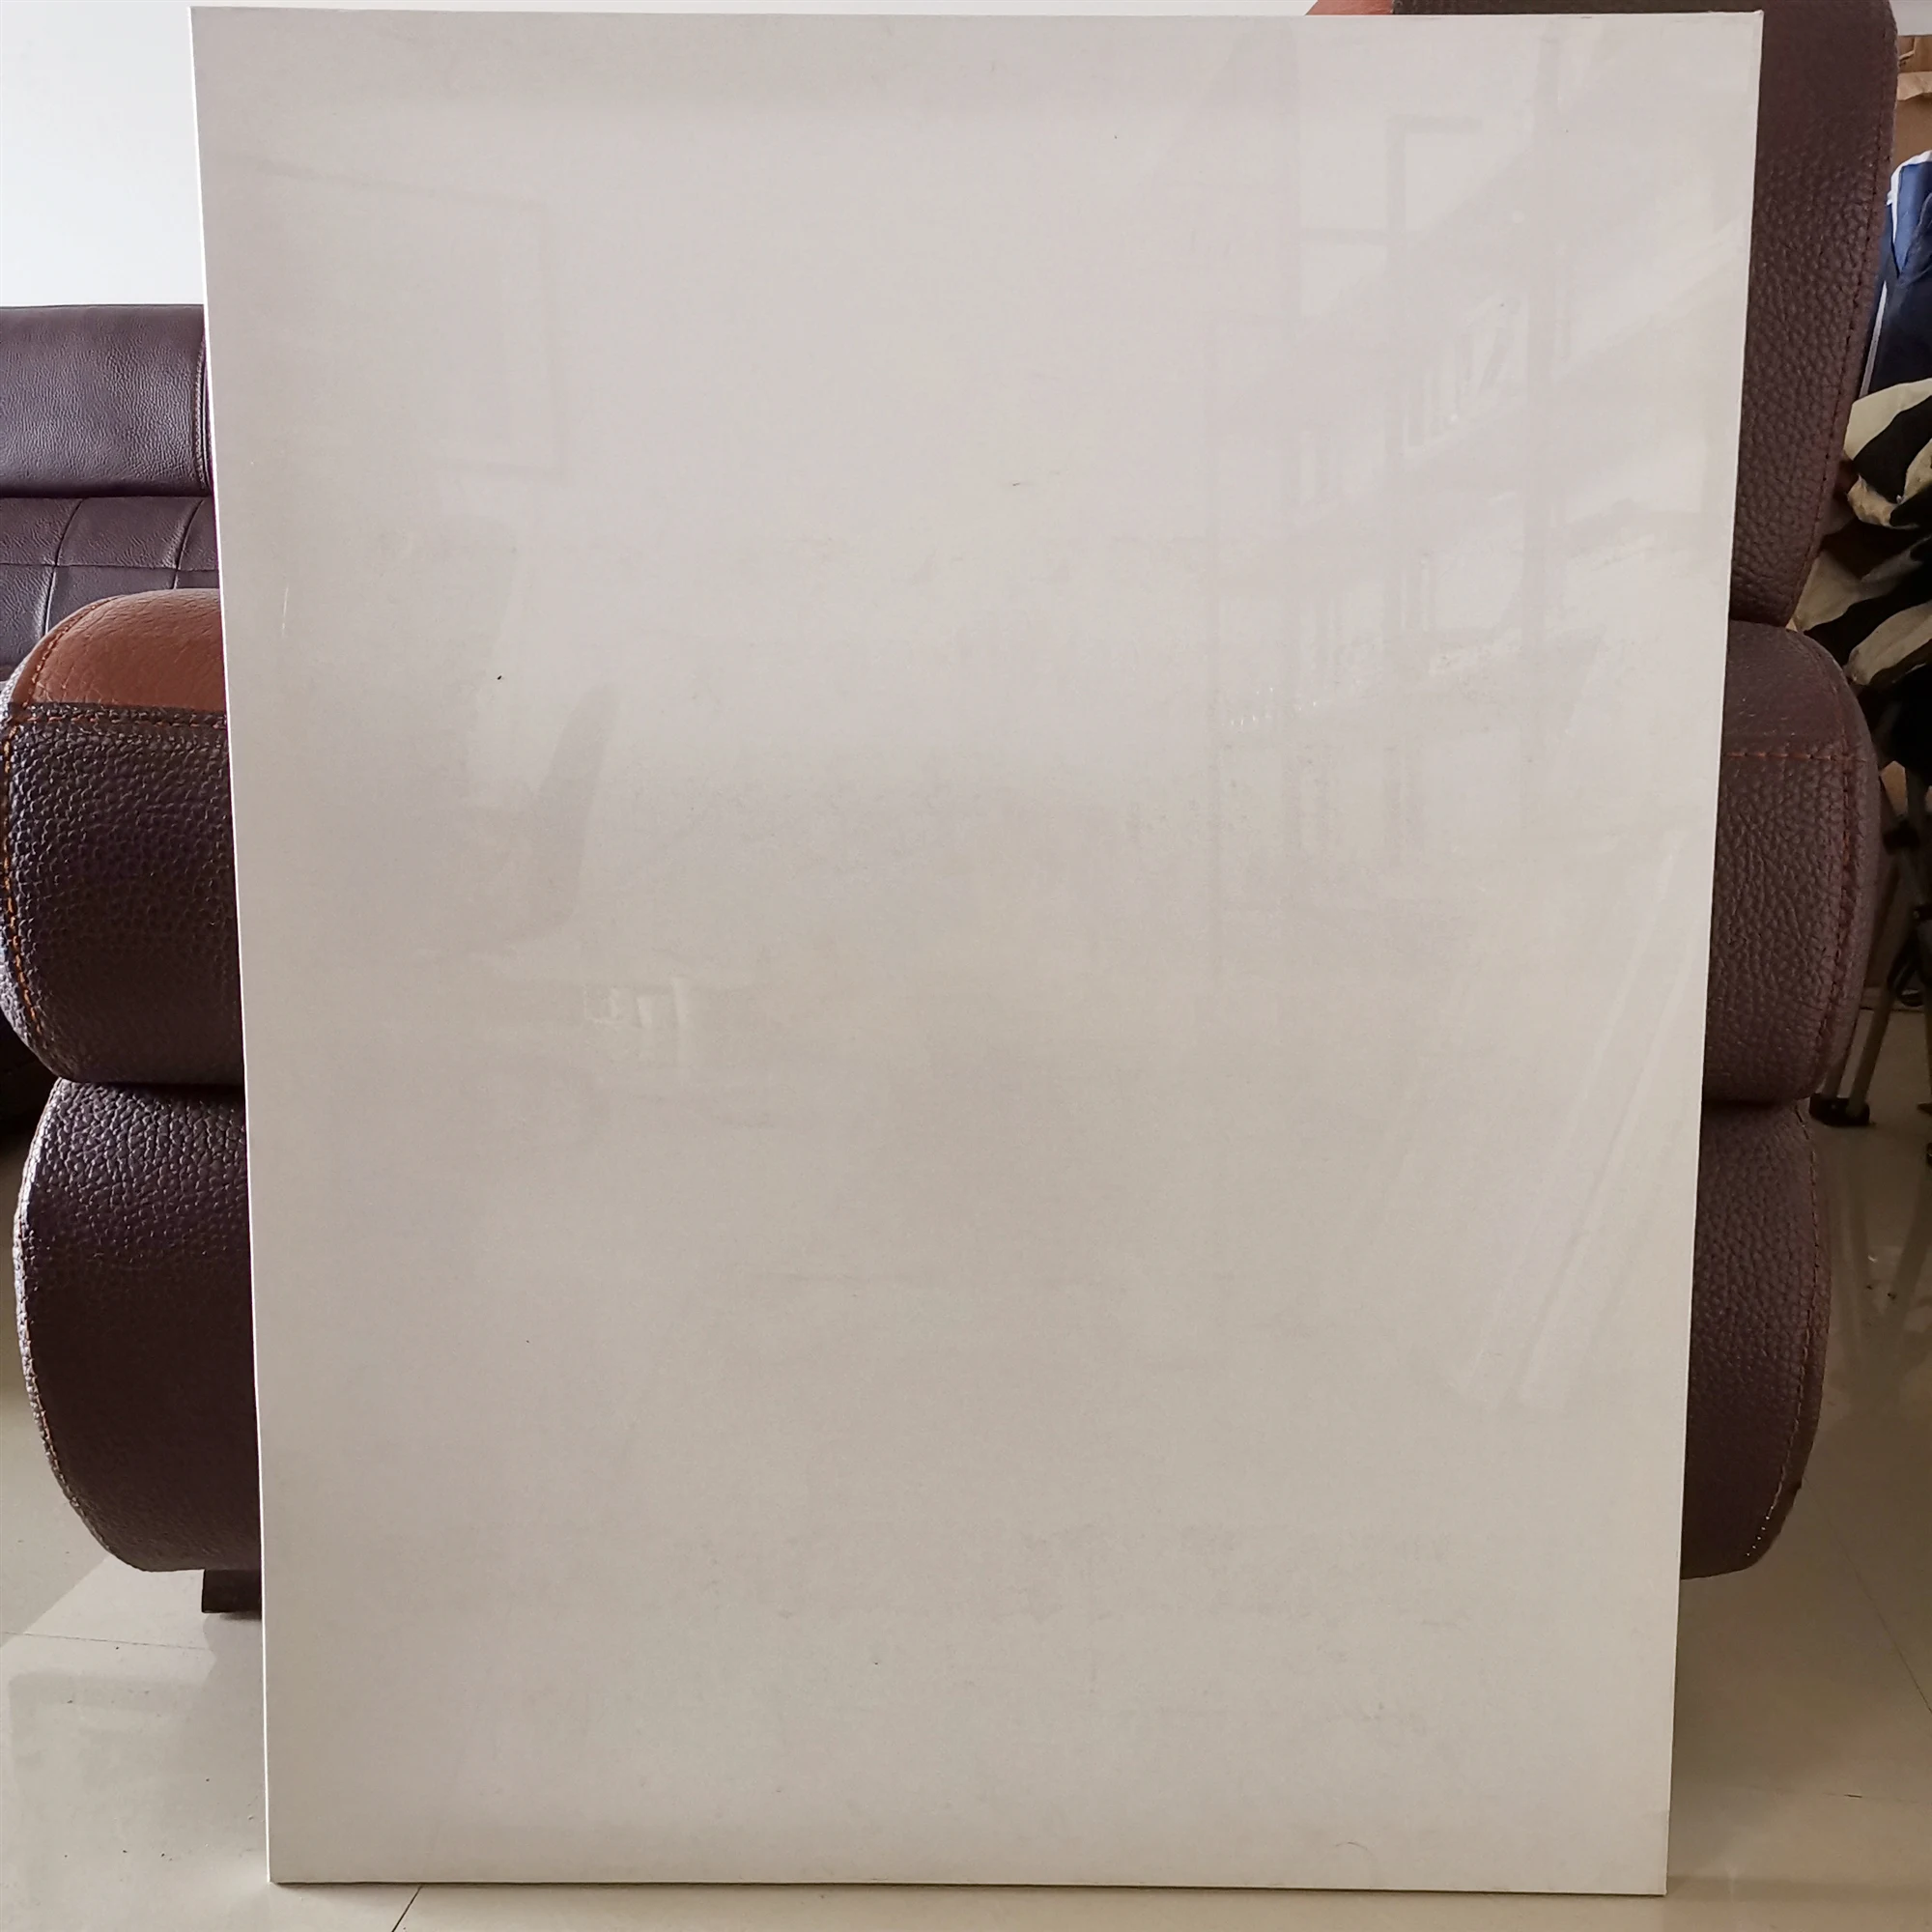 Professional Artist Stretched Canvas Large Canvases 70*90 cm (62150450526)